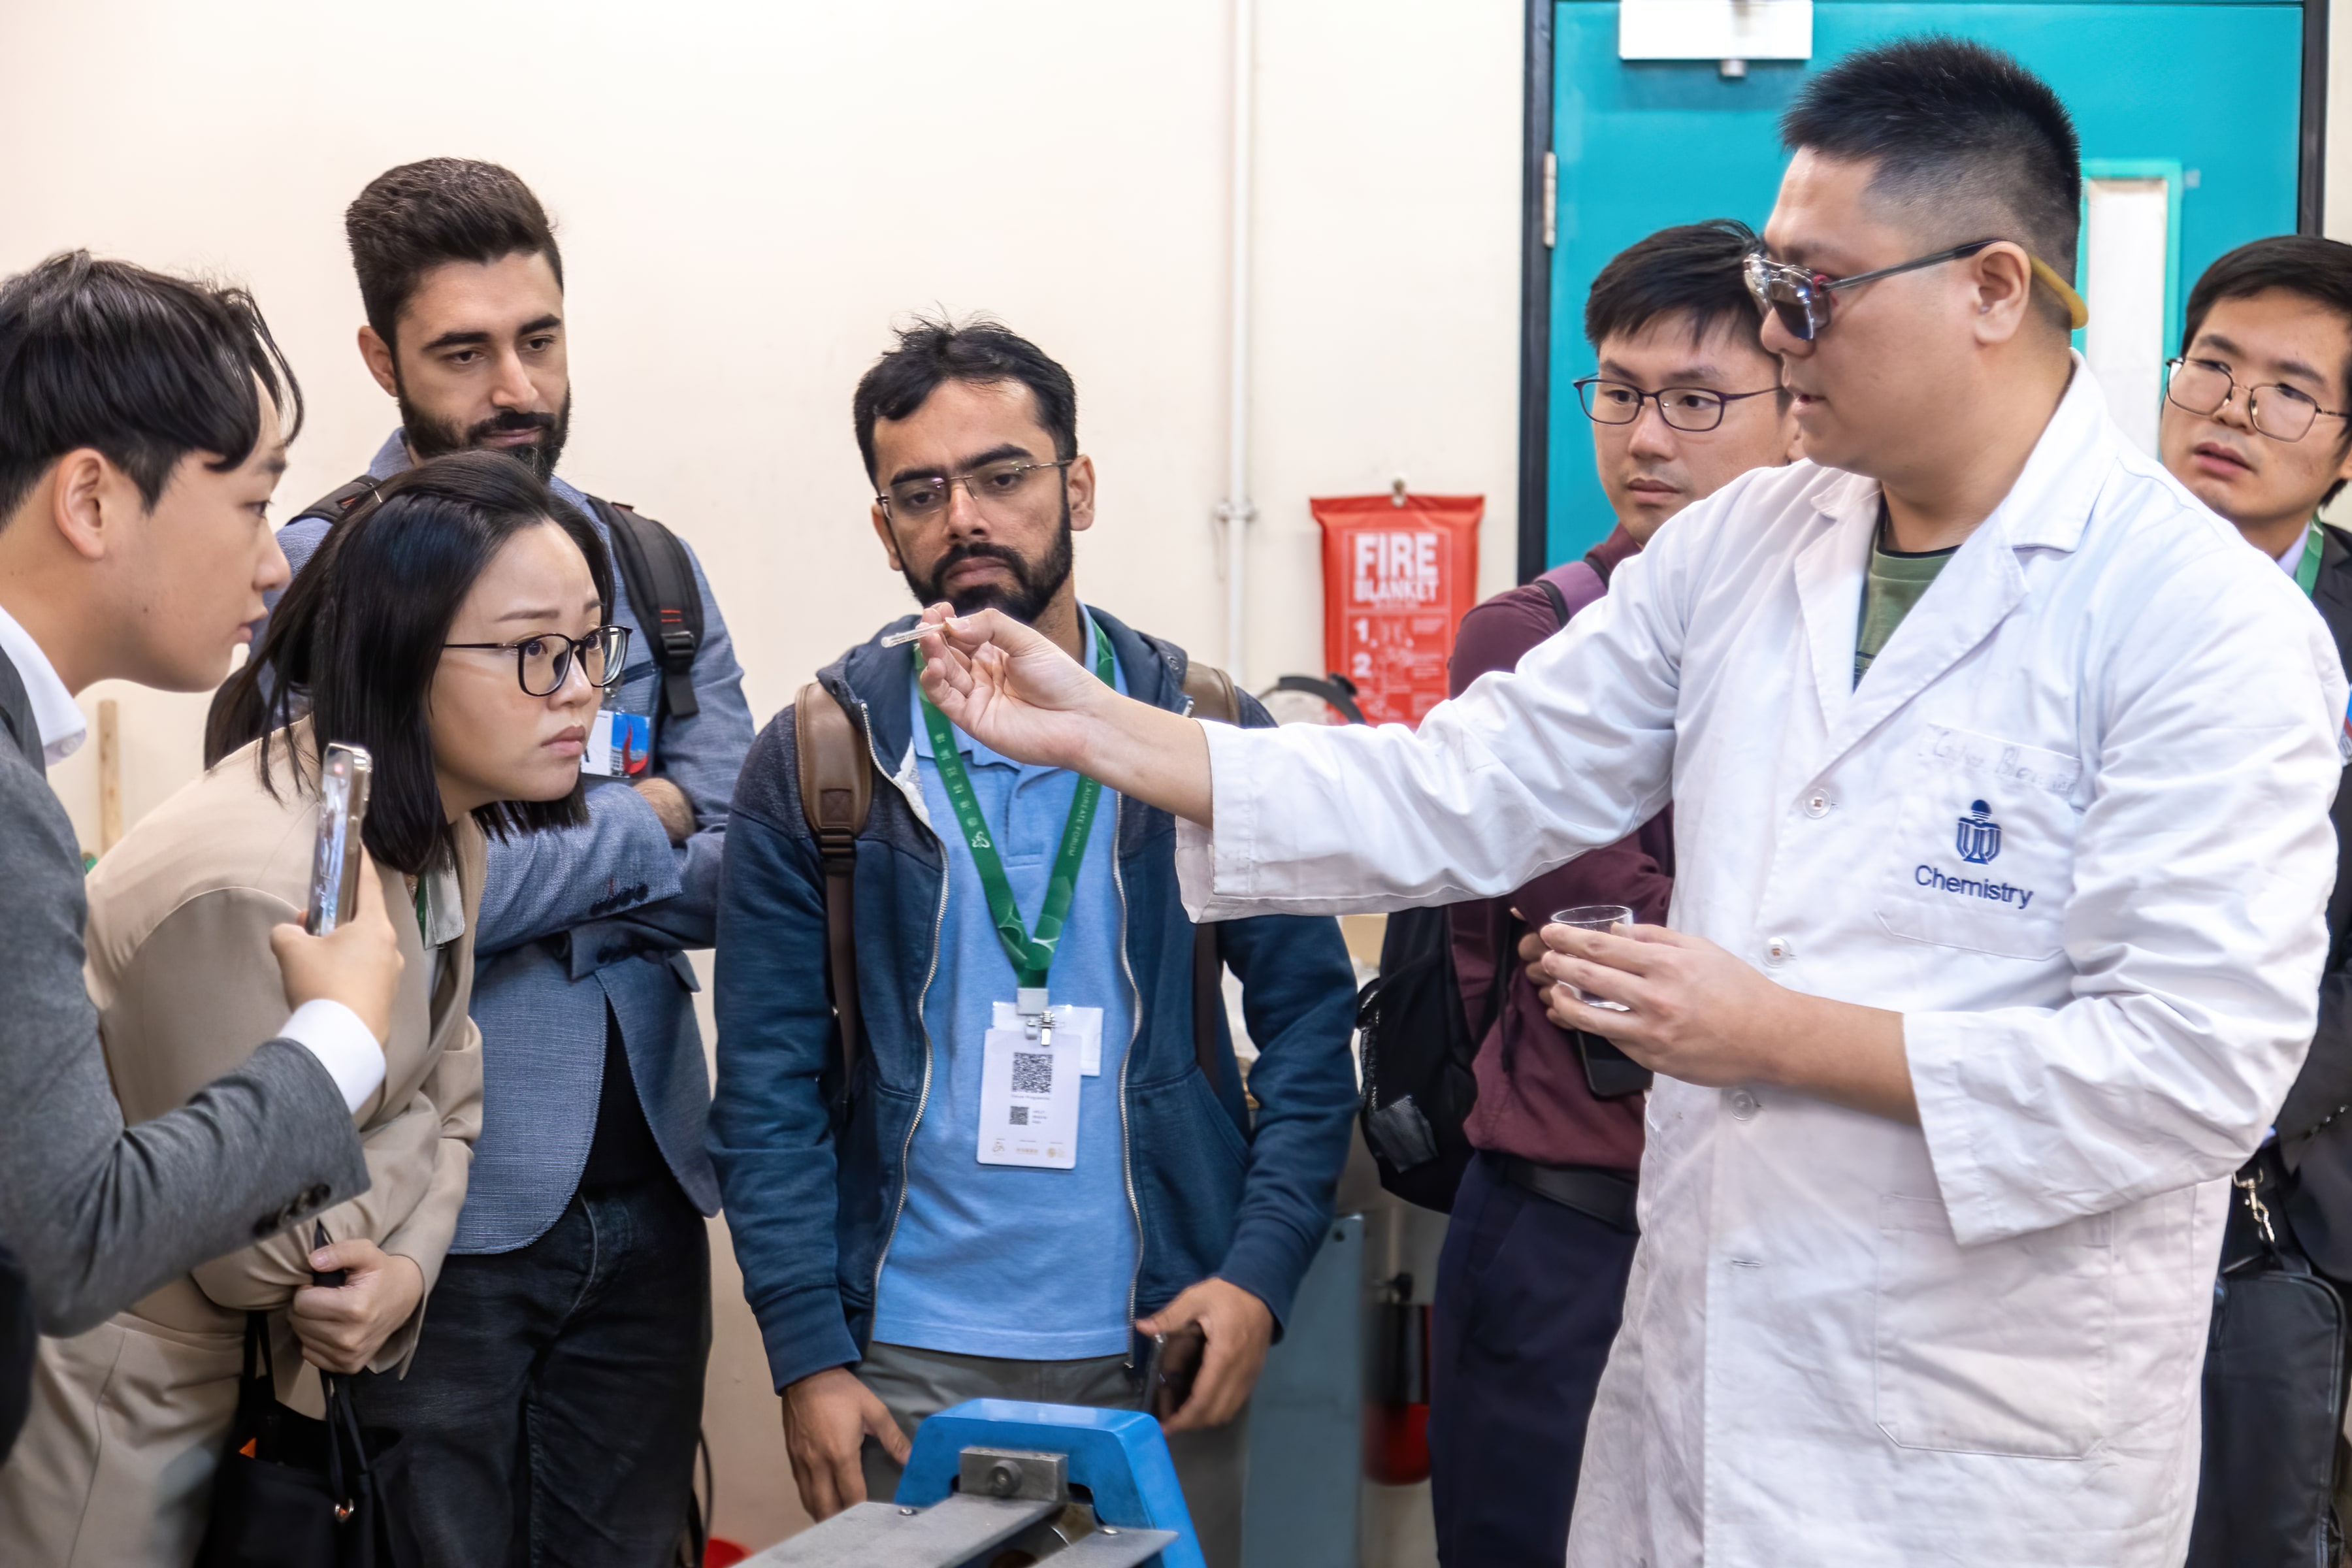 The young scientists visited the Glassblowing Facility and gained insights into its role in facilitating researchers at HKUST with the design and production of custom glass tools tailored to the specific needs of diverse research facilities.